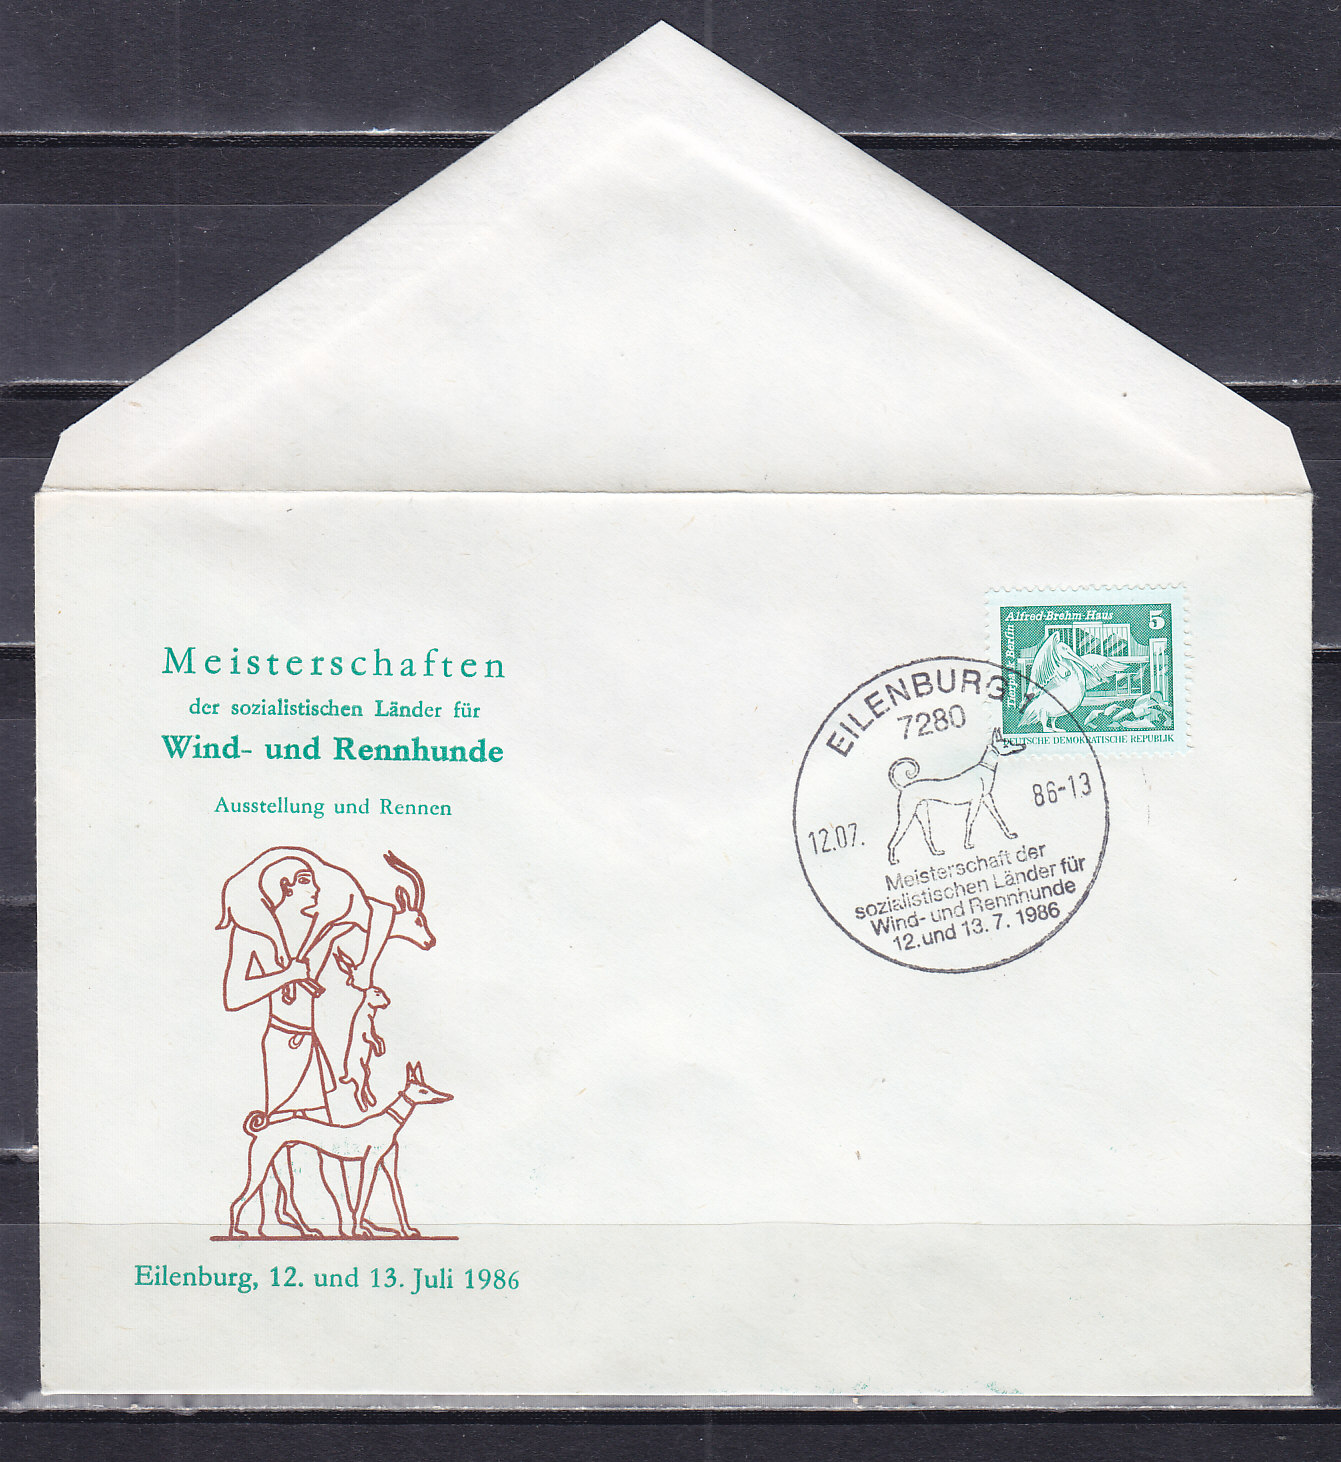 GDR, 1986, the Championship of Socialist countries in dog racing. Envelope with cancellation on July 12 (2)